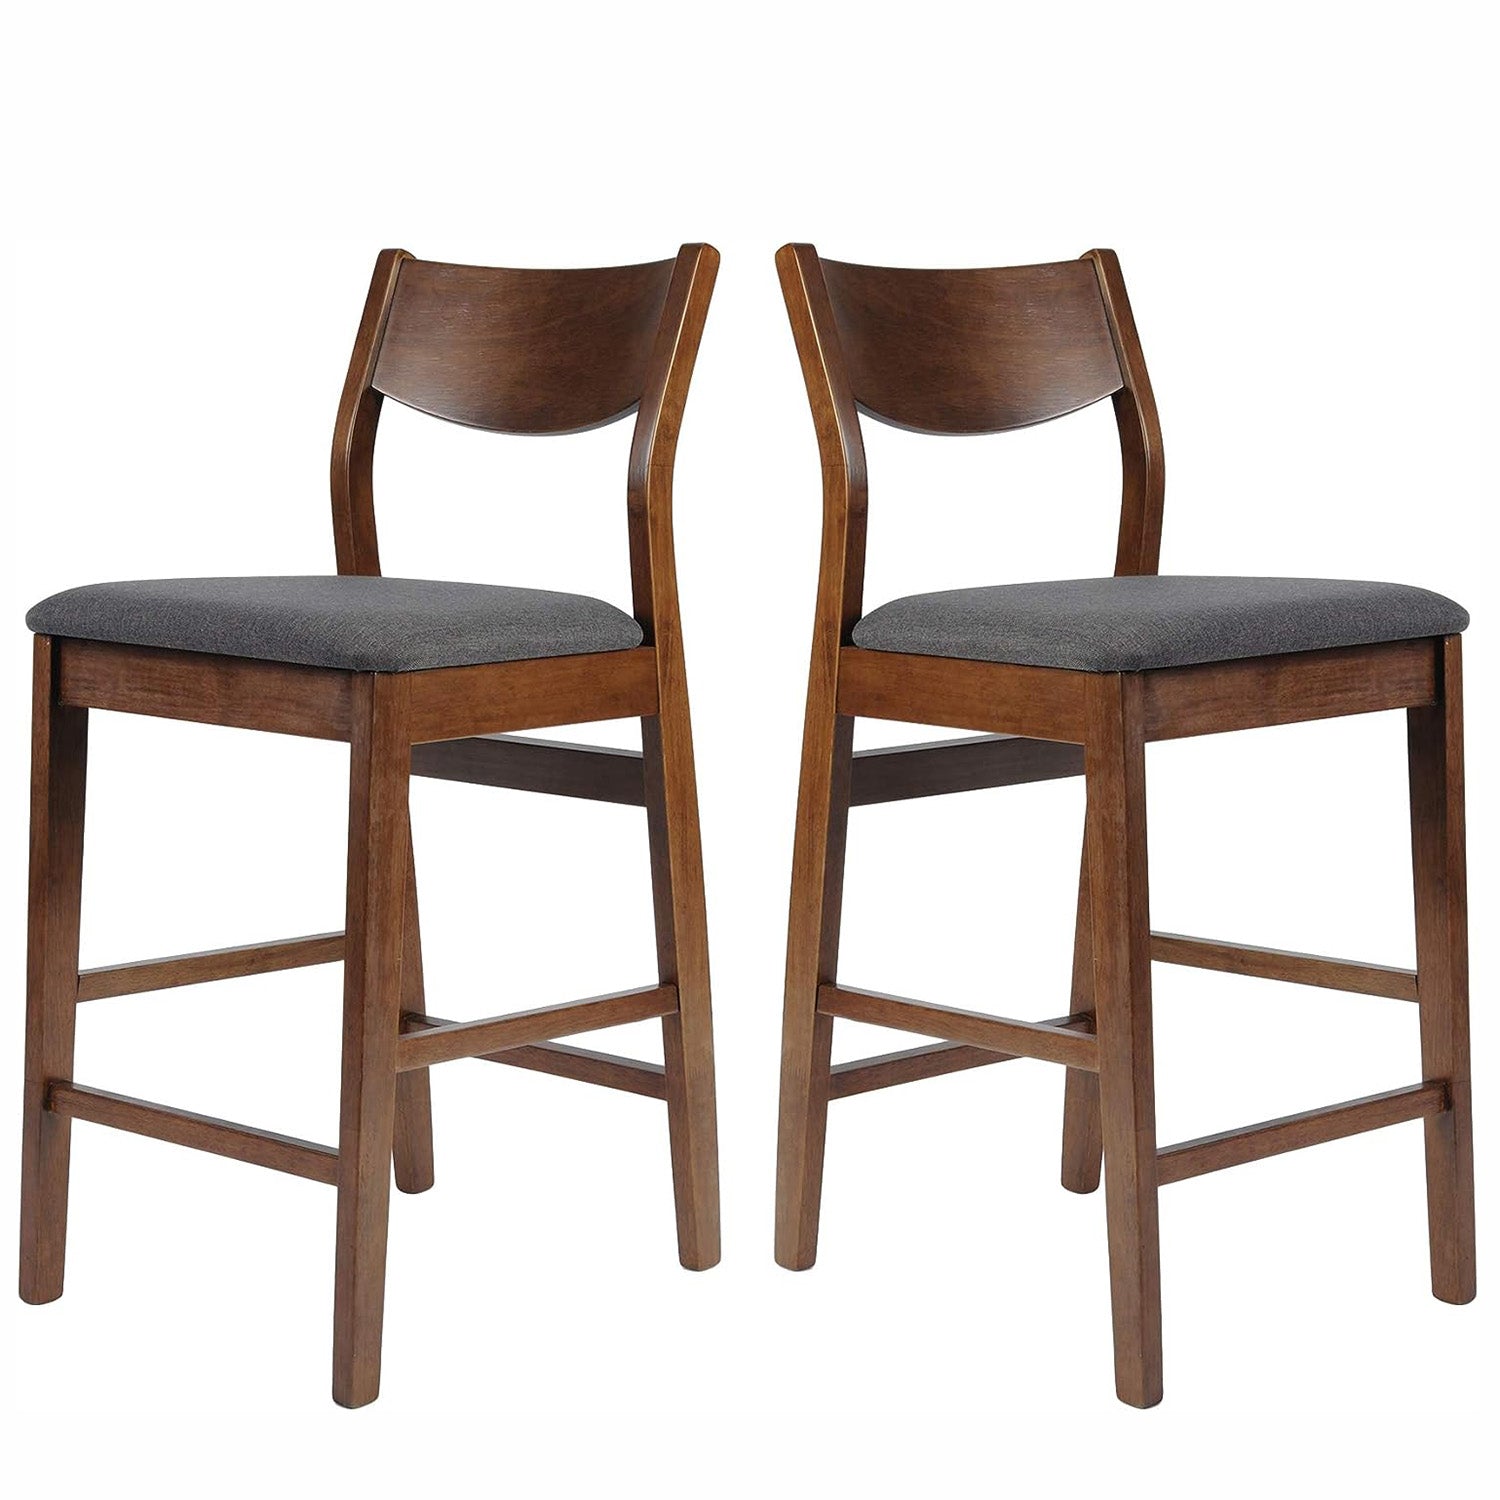 Set of 2 Dining Chairs Bar Stools Upholstered 24" High Chairs, Dark Gray Fabric and Walnut Finish